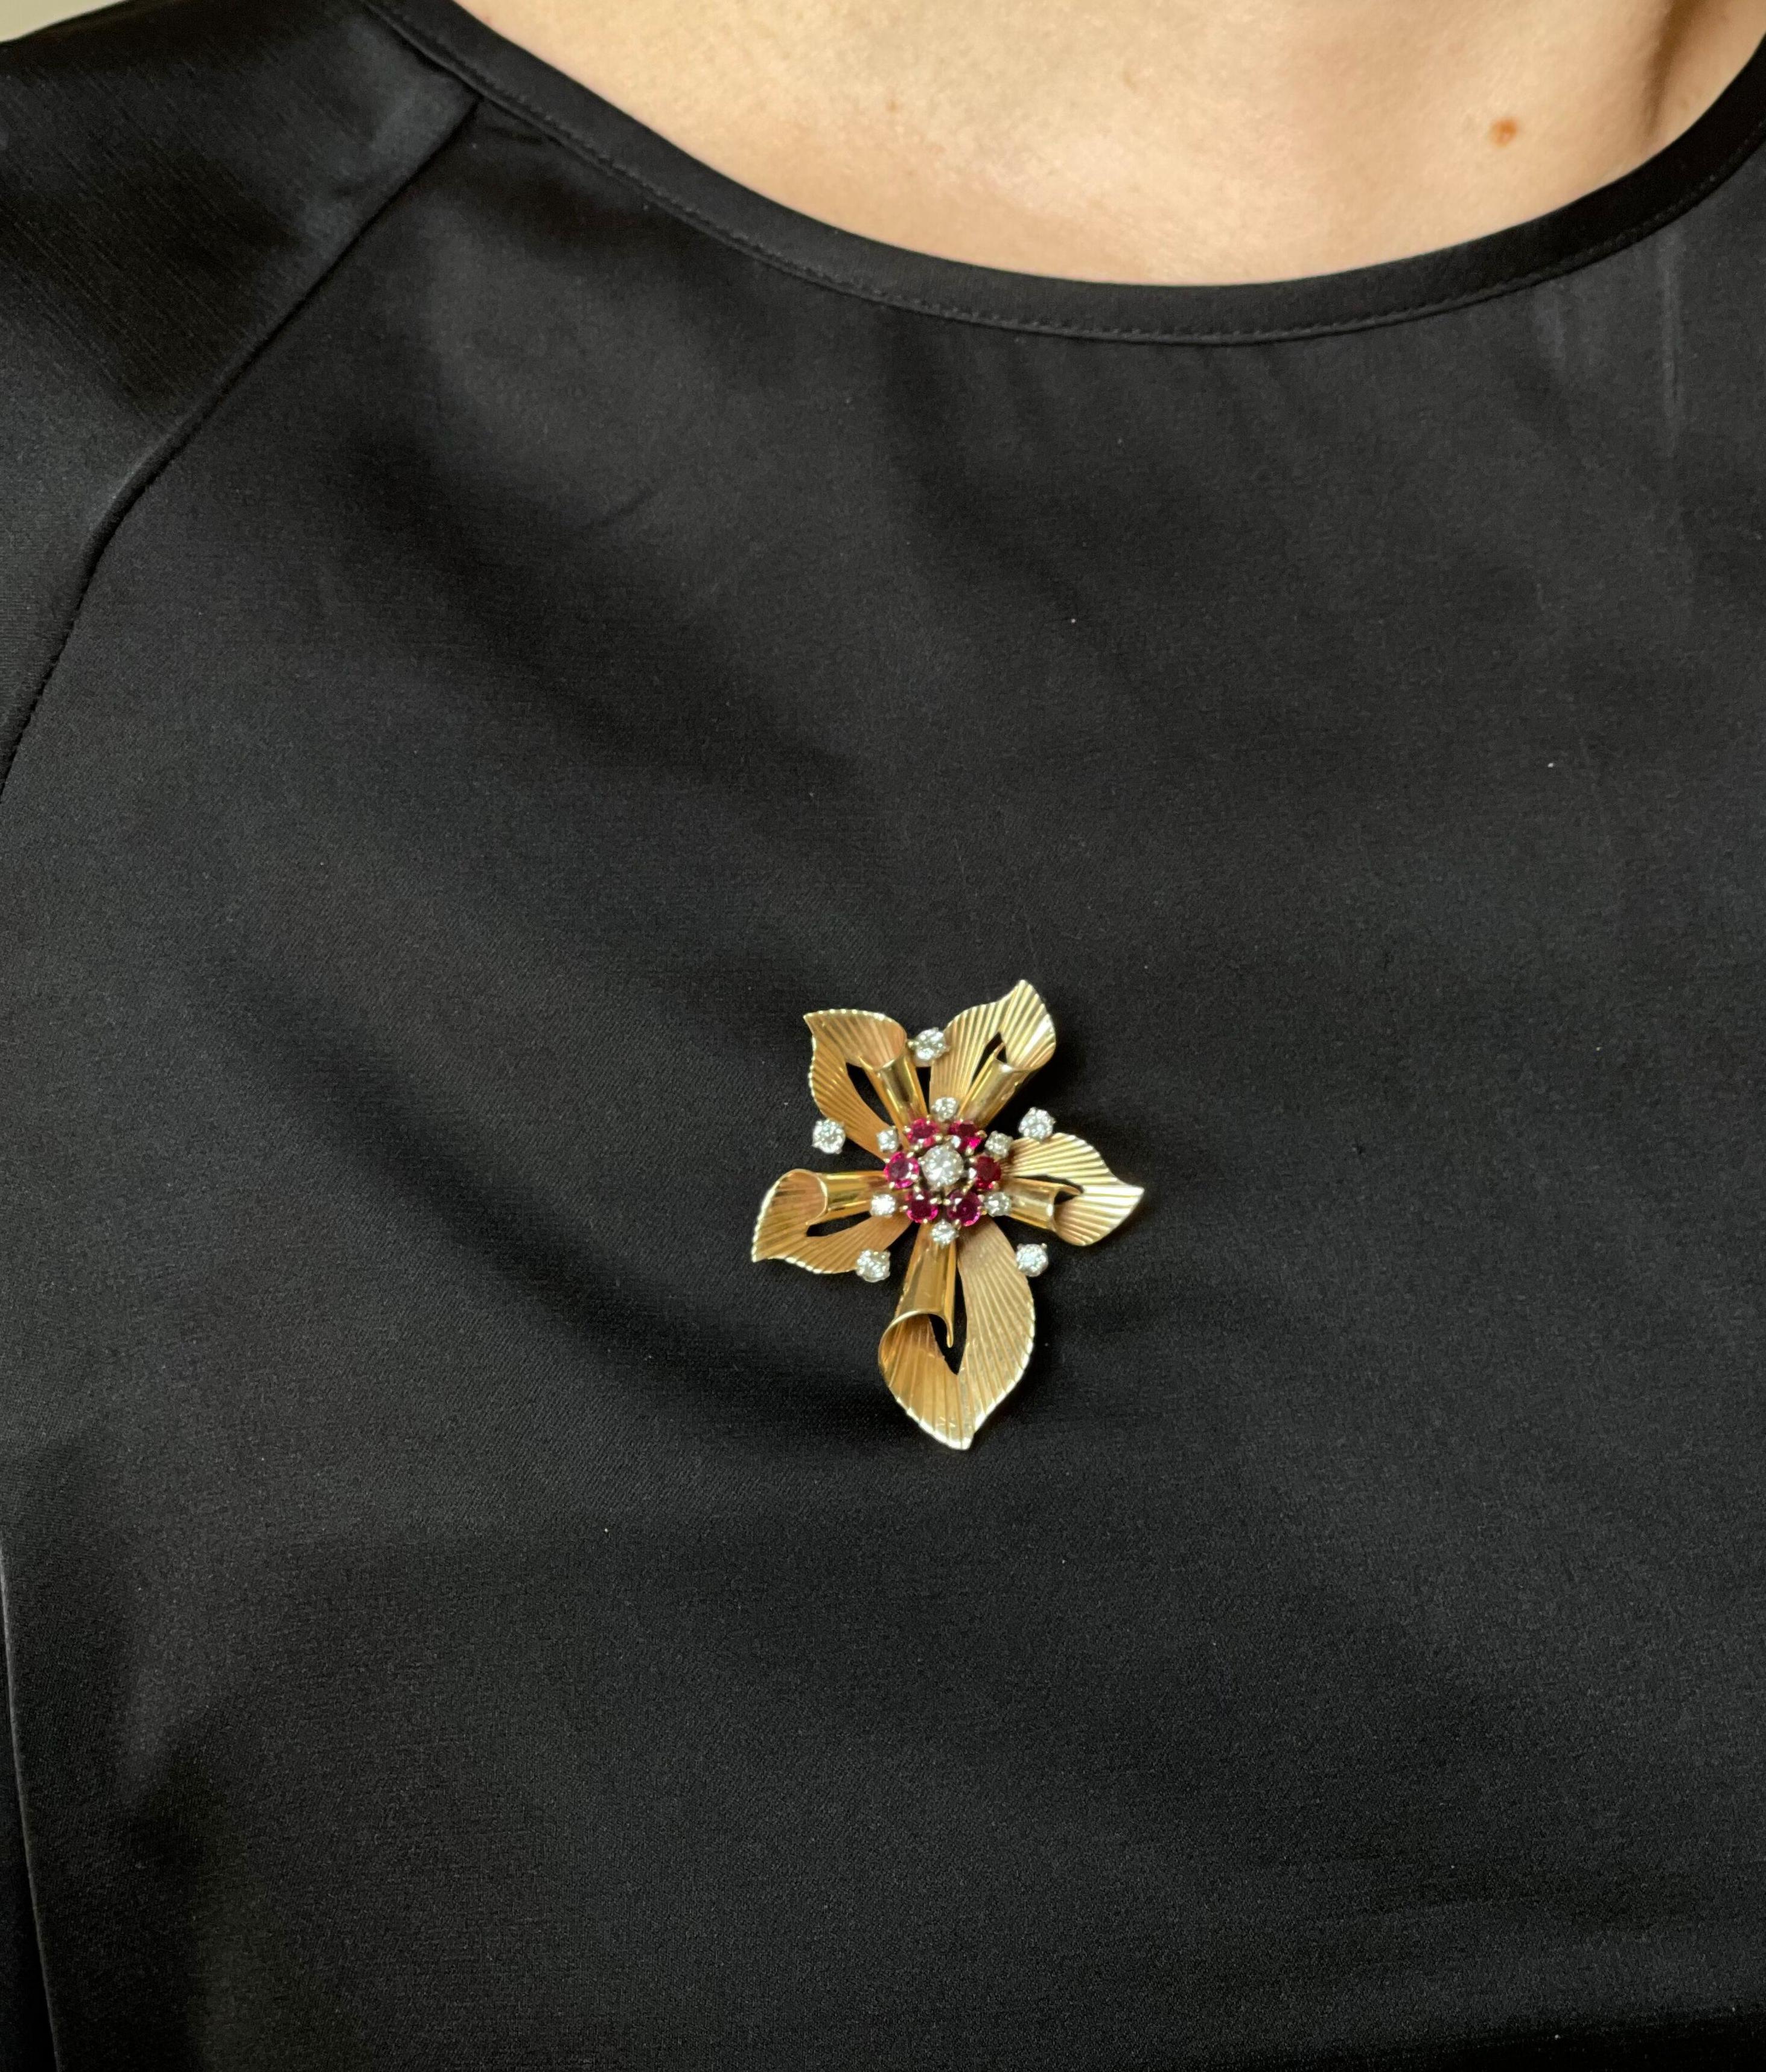 Retro classic 14k gold flower brooch by Raymond Yard, set with vibrant rubies and approx. 0.65ctw in diamonds. Brooch measures 1.75